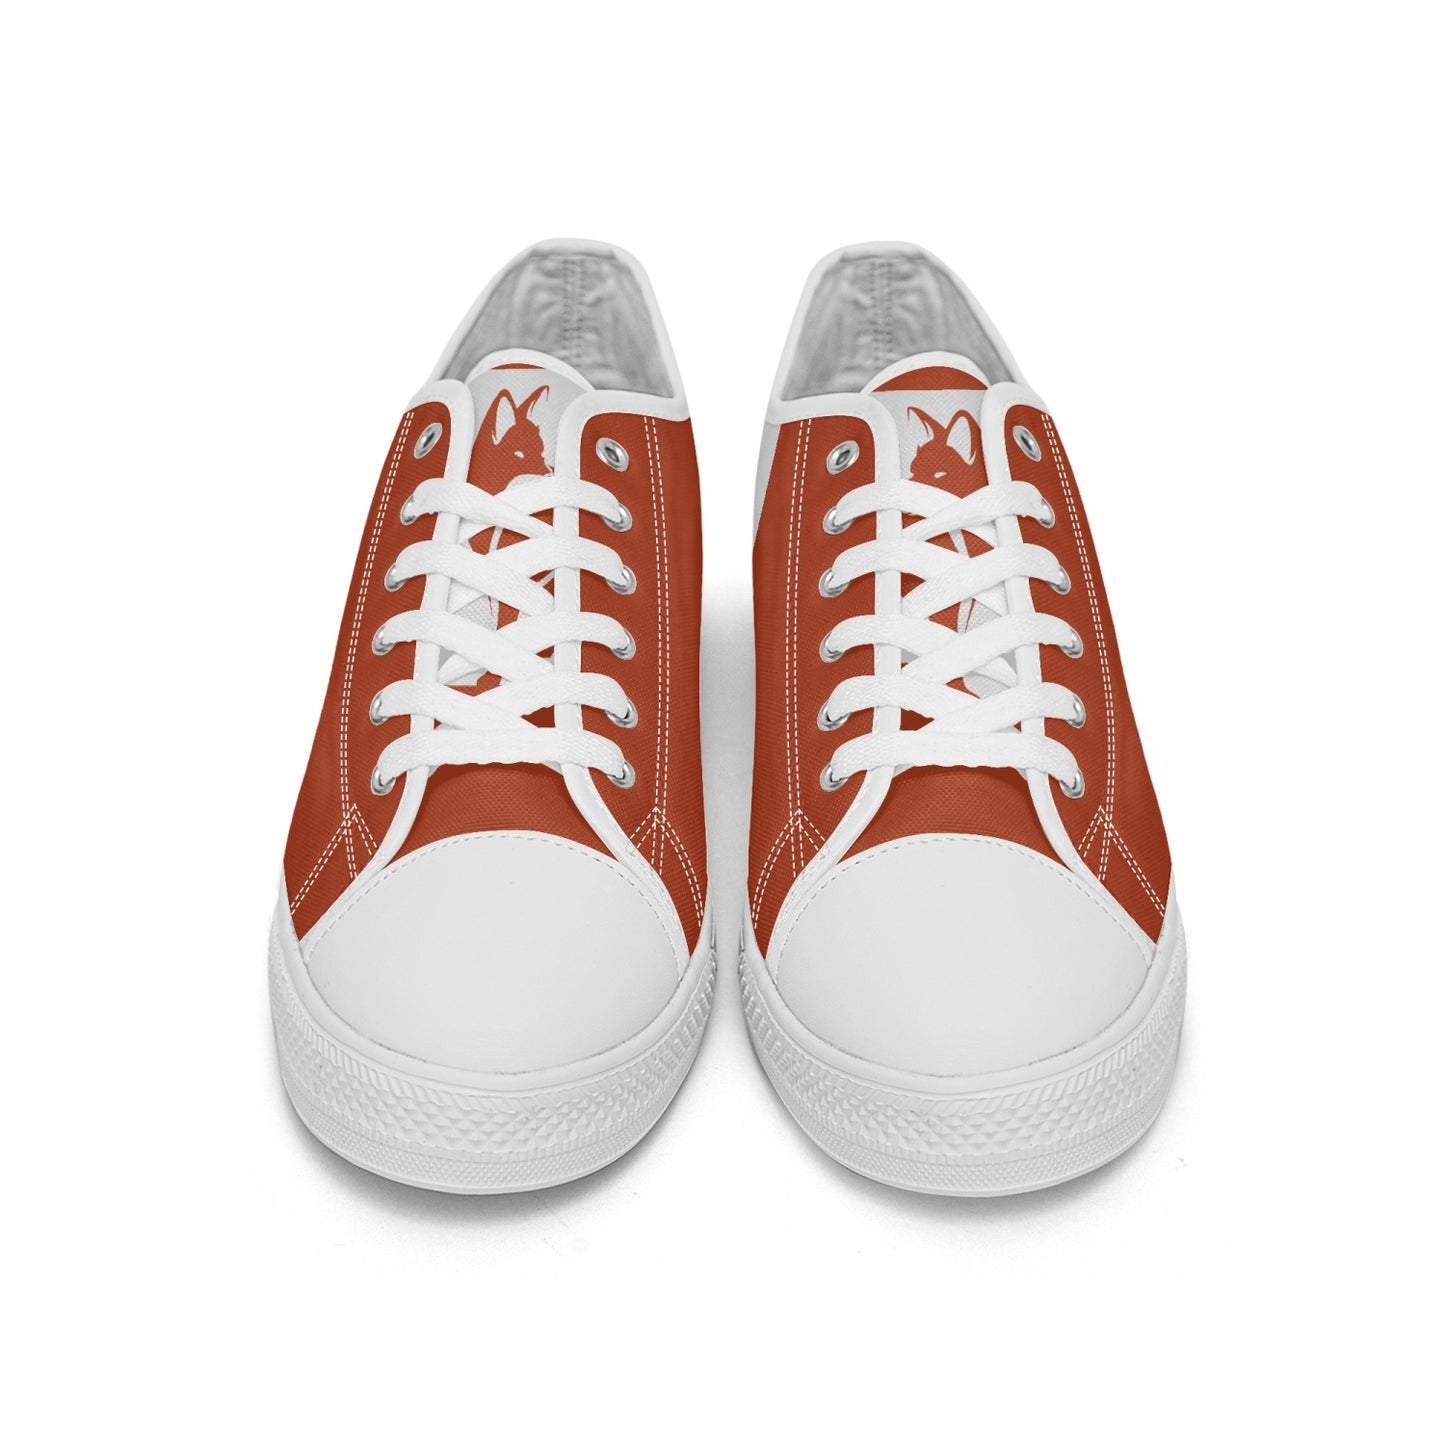 Fox Feet Low-Top Canvas Shoes